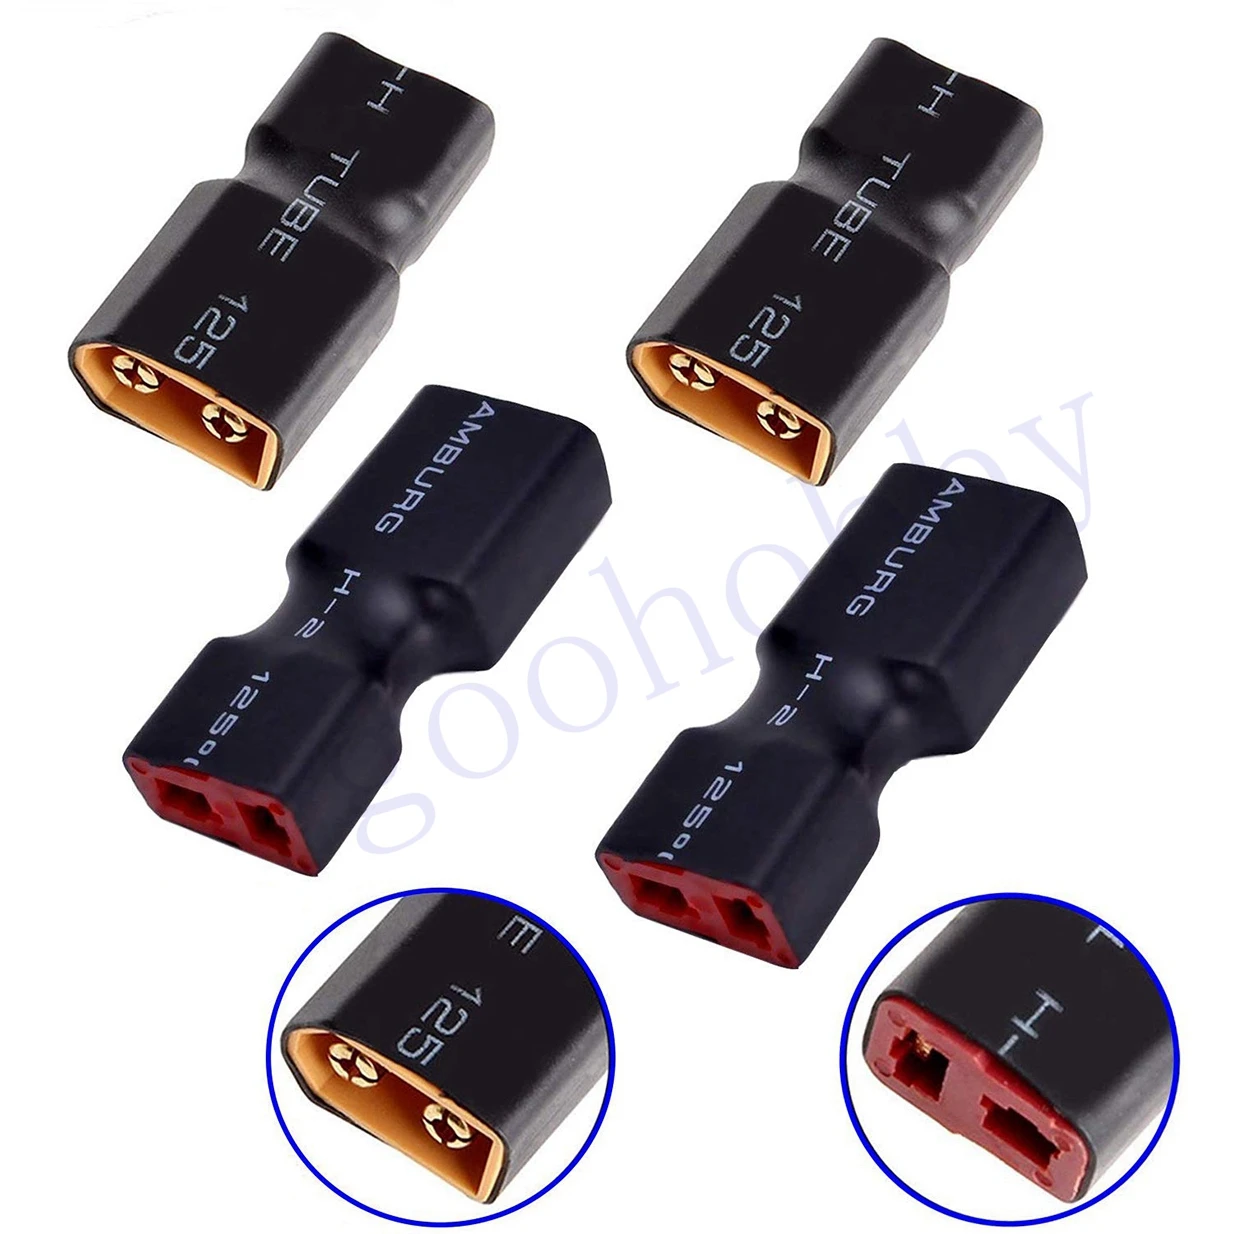 

4PCS XT60 Male to Deans T Plug Female Connector Adapter No Wires Wireless RC LiPo NiMH Battery ESC Connector Adapters